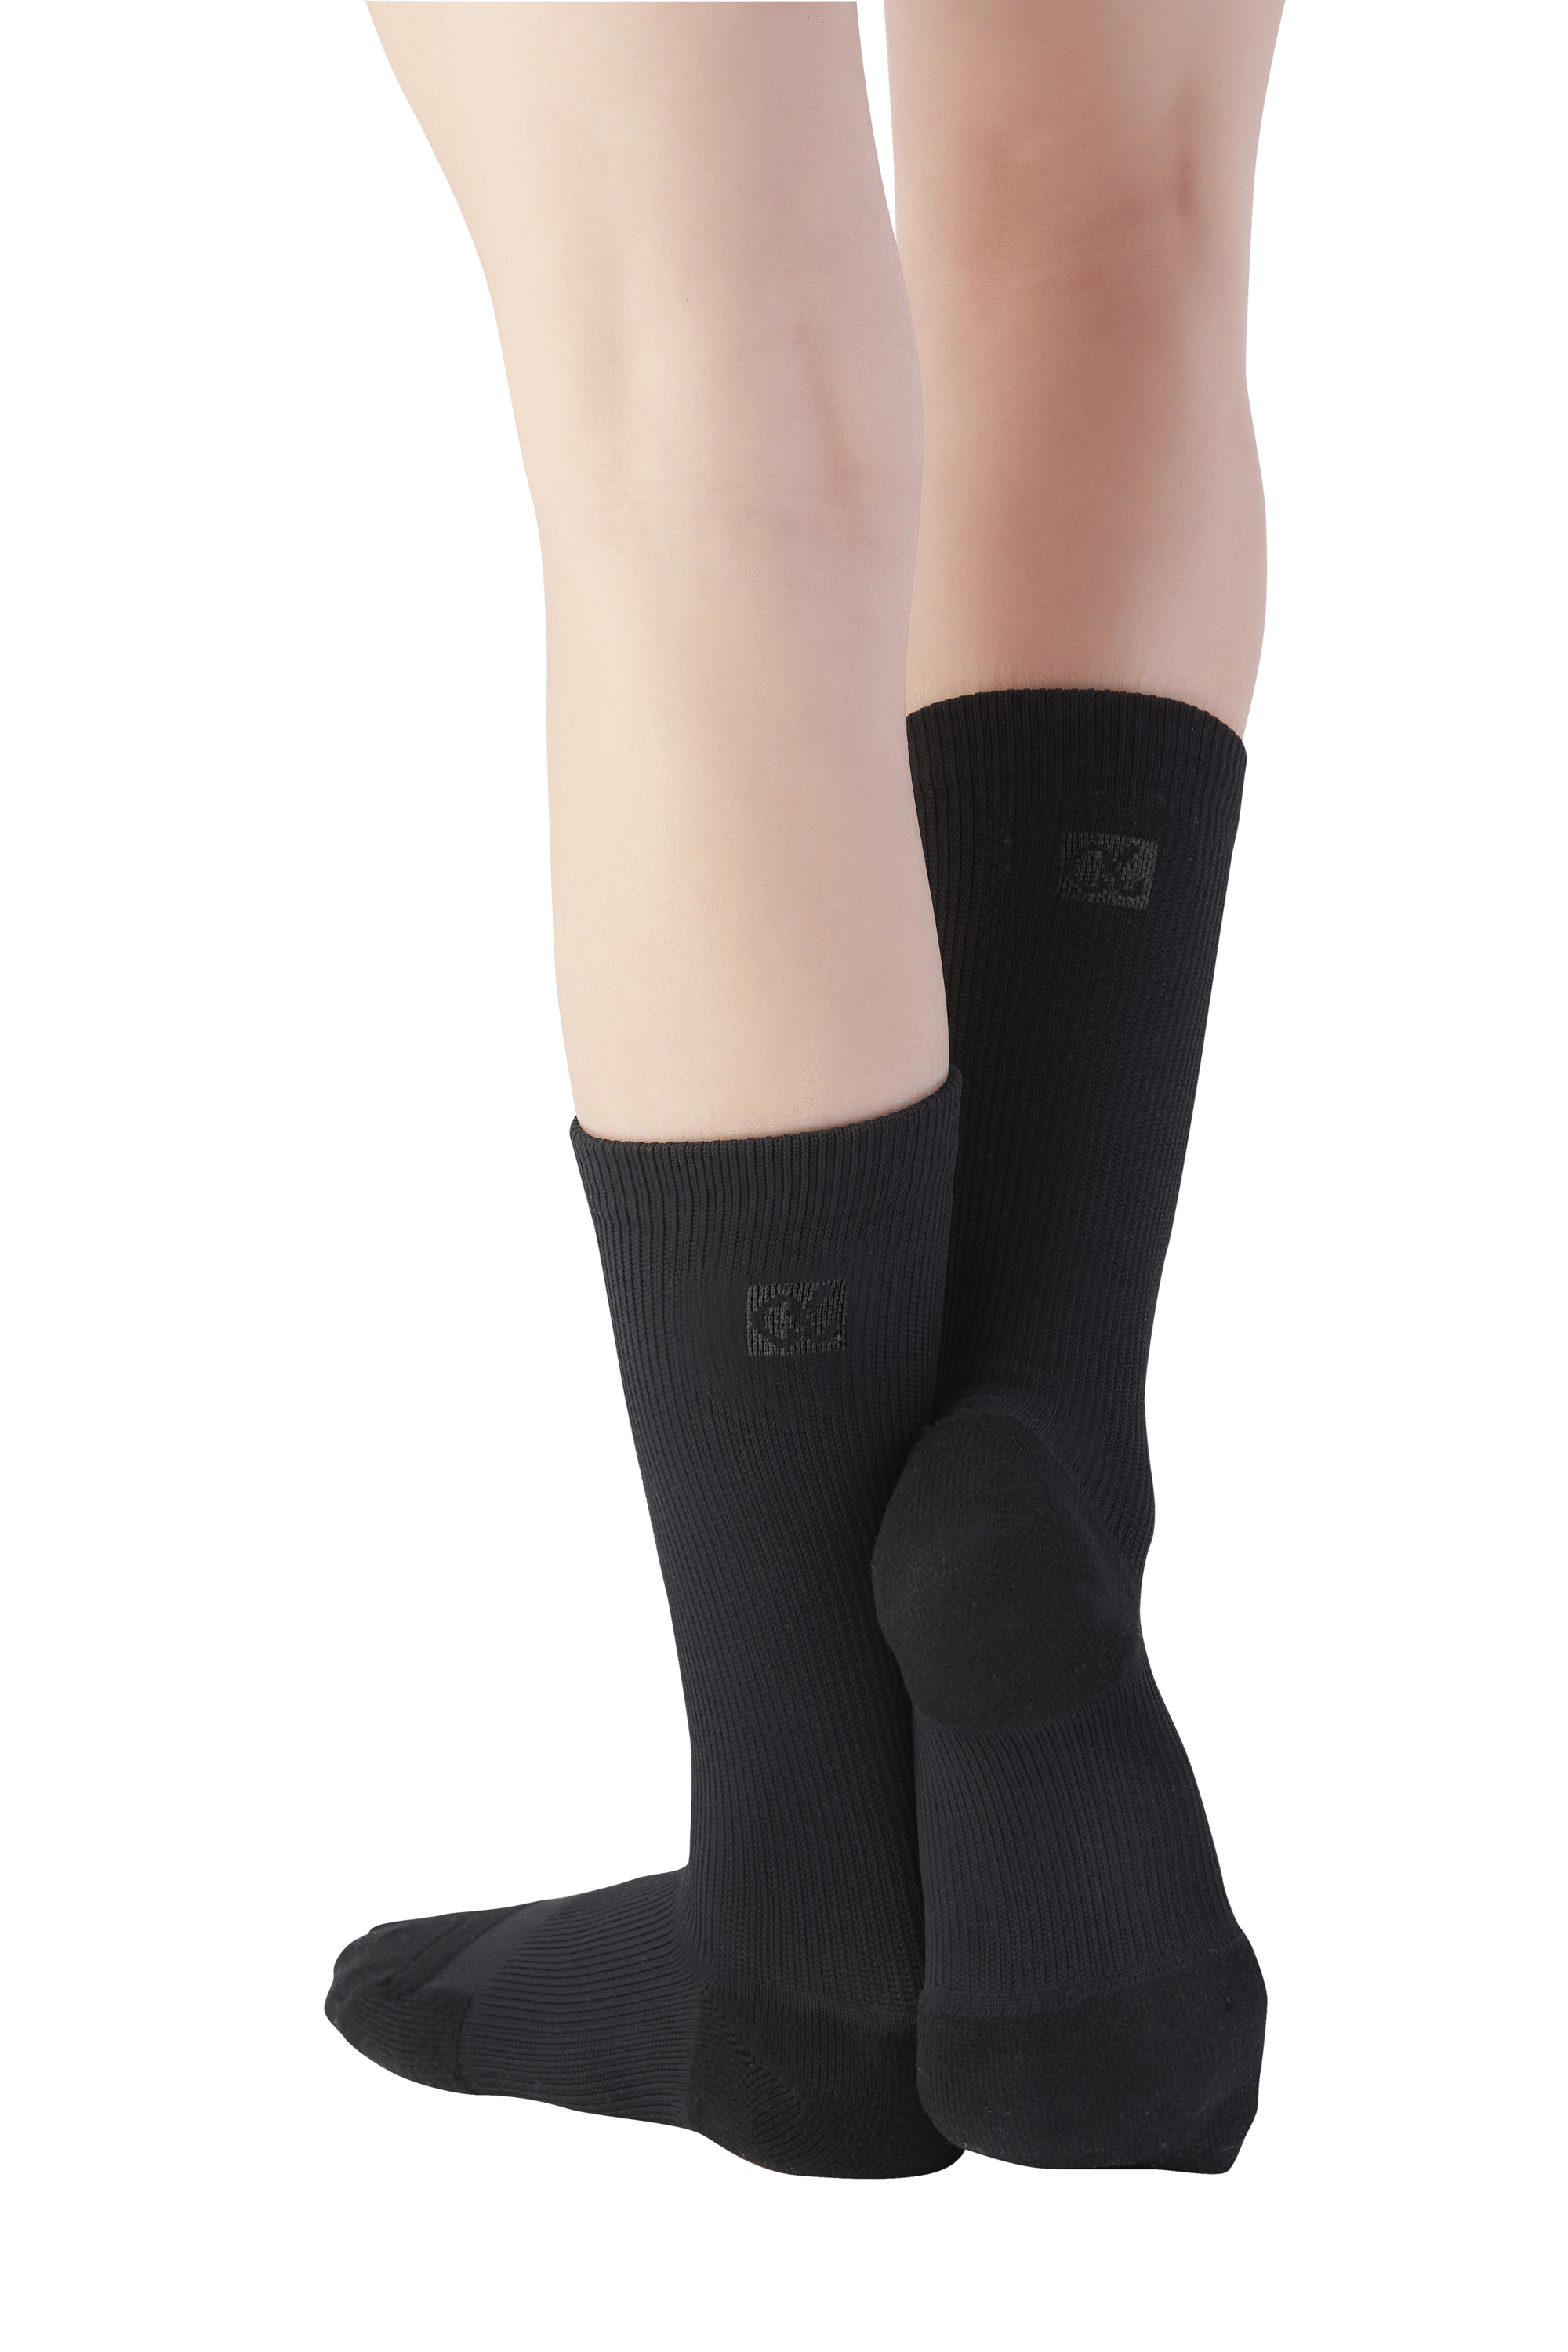 Infinite Shock Dance Socks without Traction – Inspirations